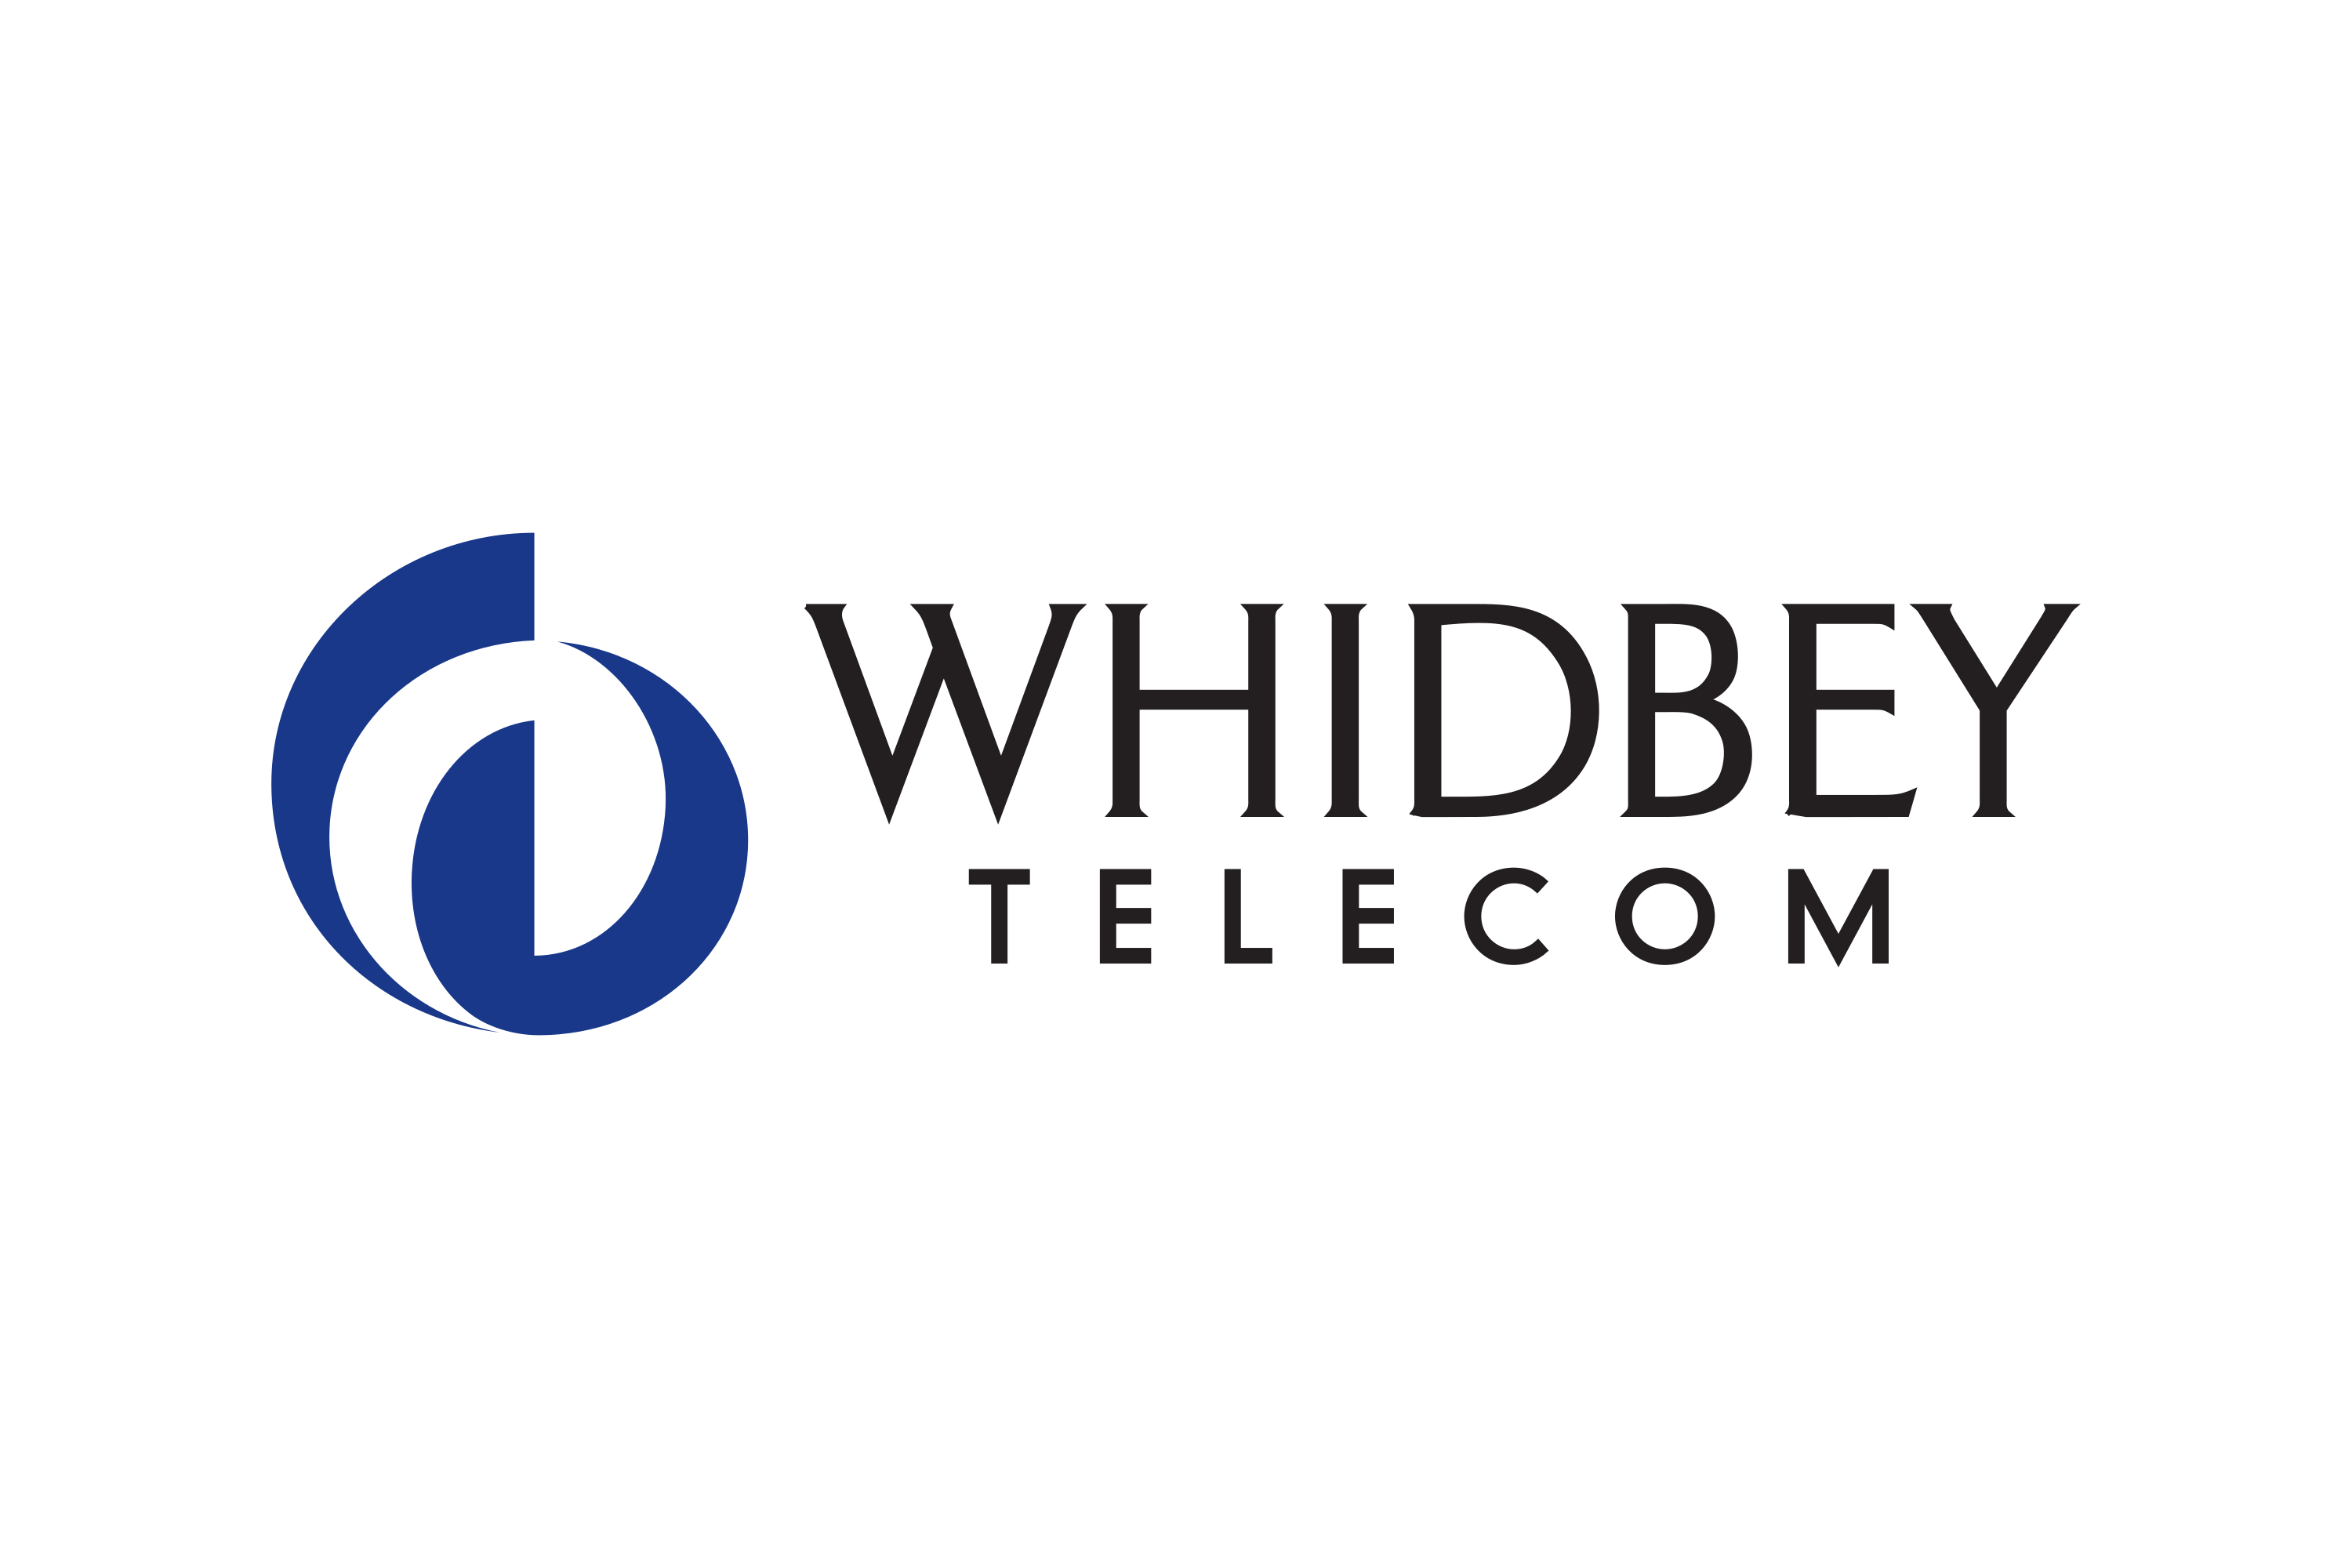 Whidbey Telecom